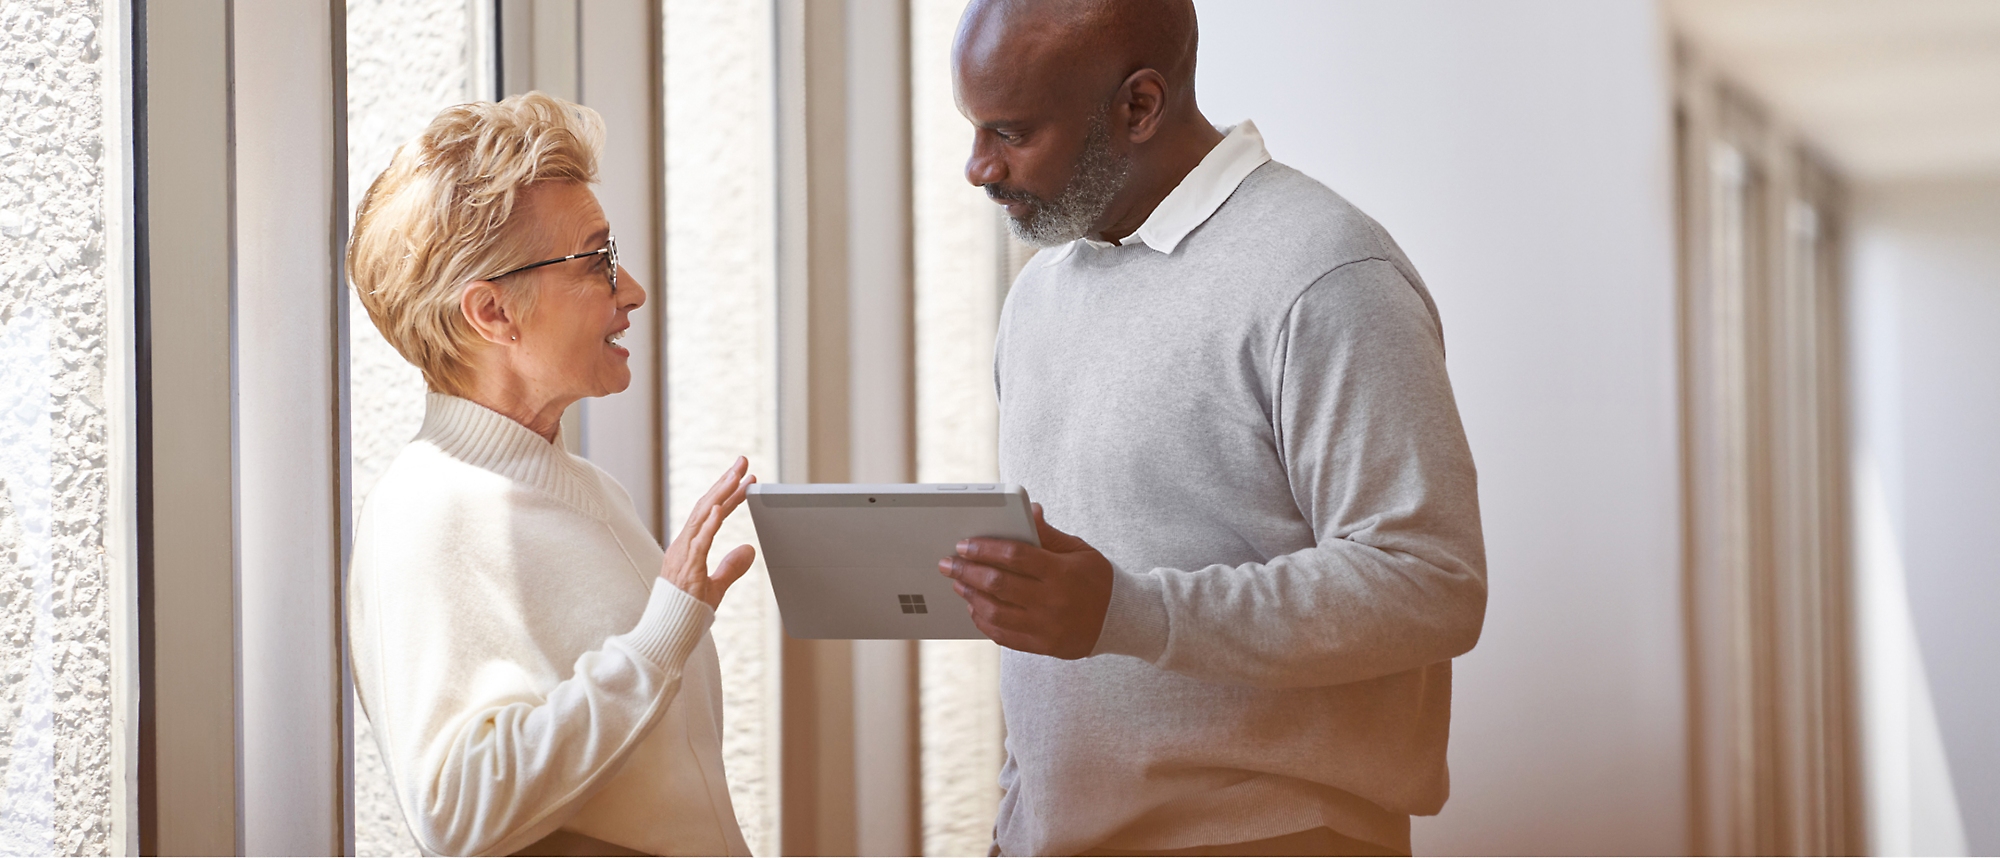 A man and woman standing next to each other holding a tablet.